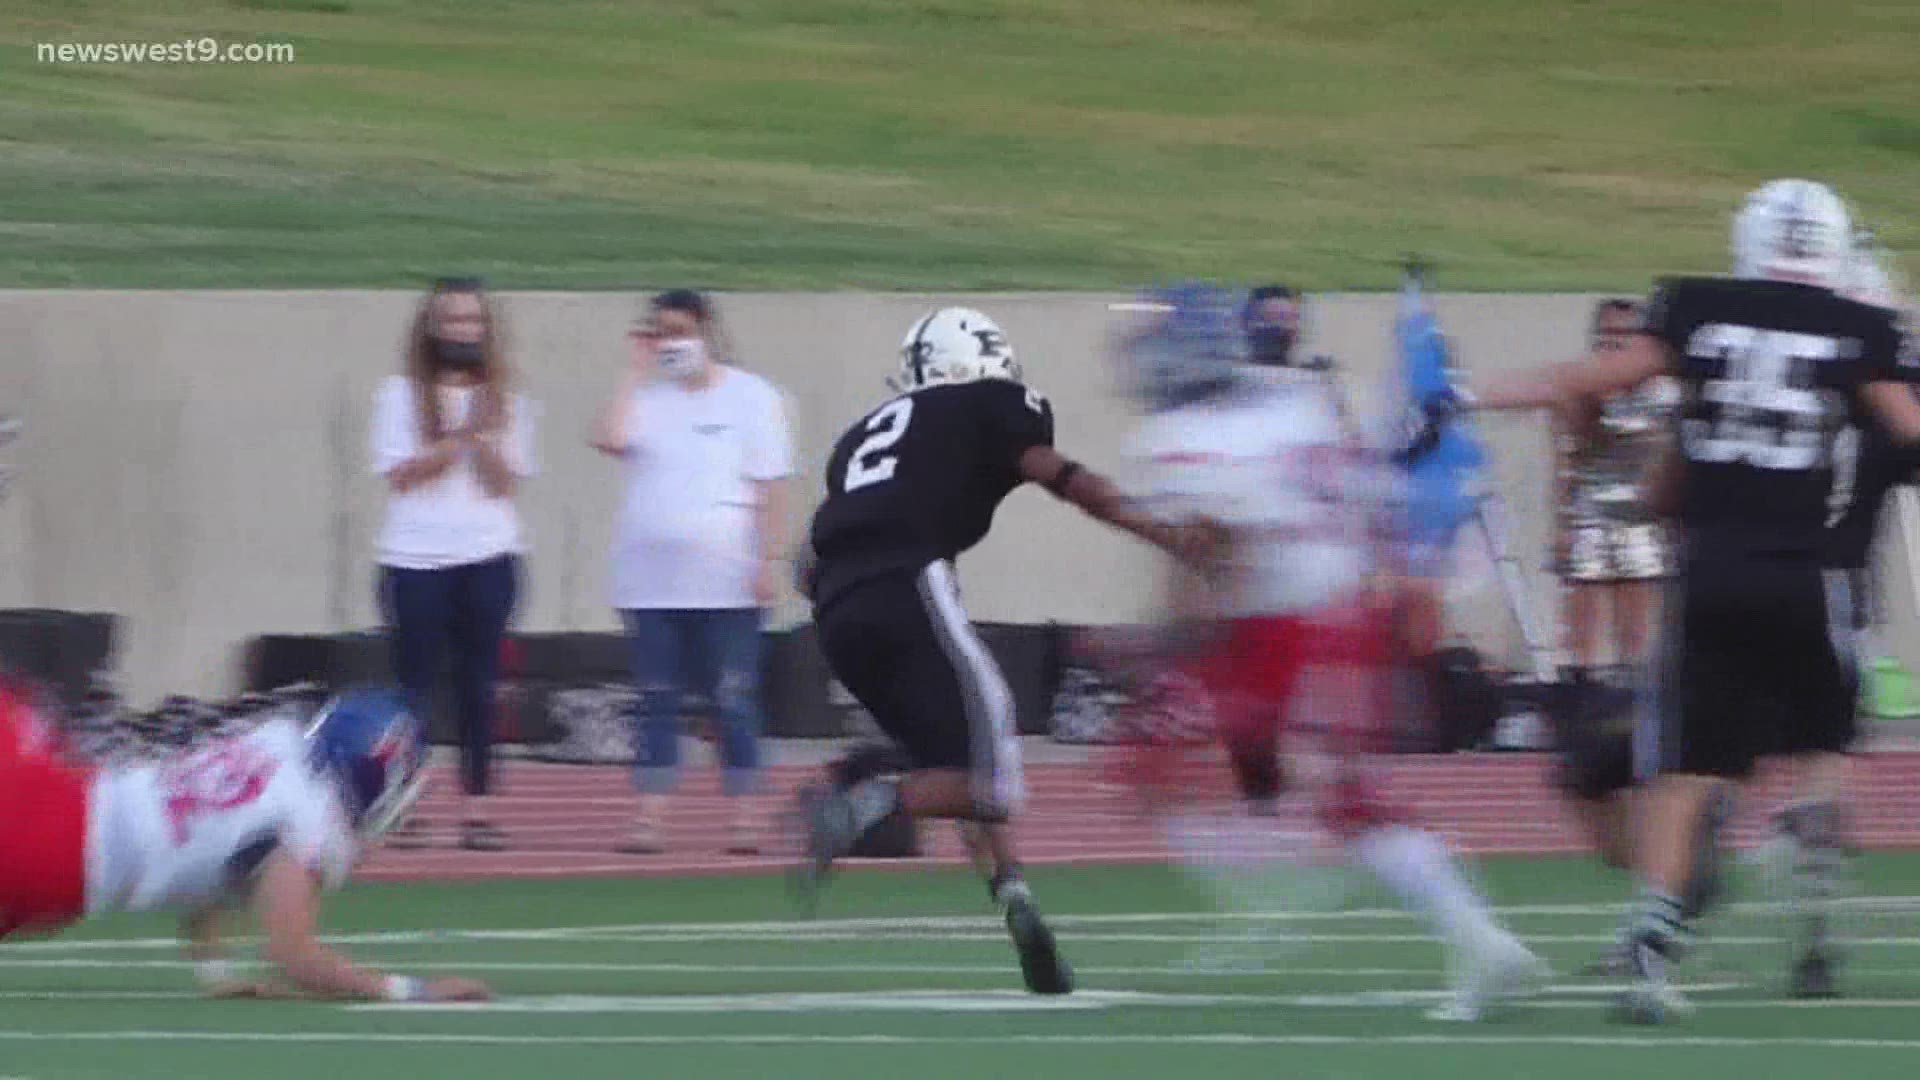 Our GameTime Week 5 Big Time Play is Permian senior, Amarion Garrett, getting the scoring going with this tough pick six.